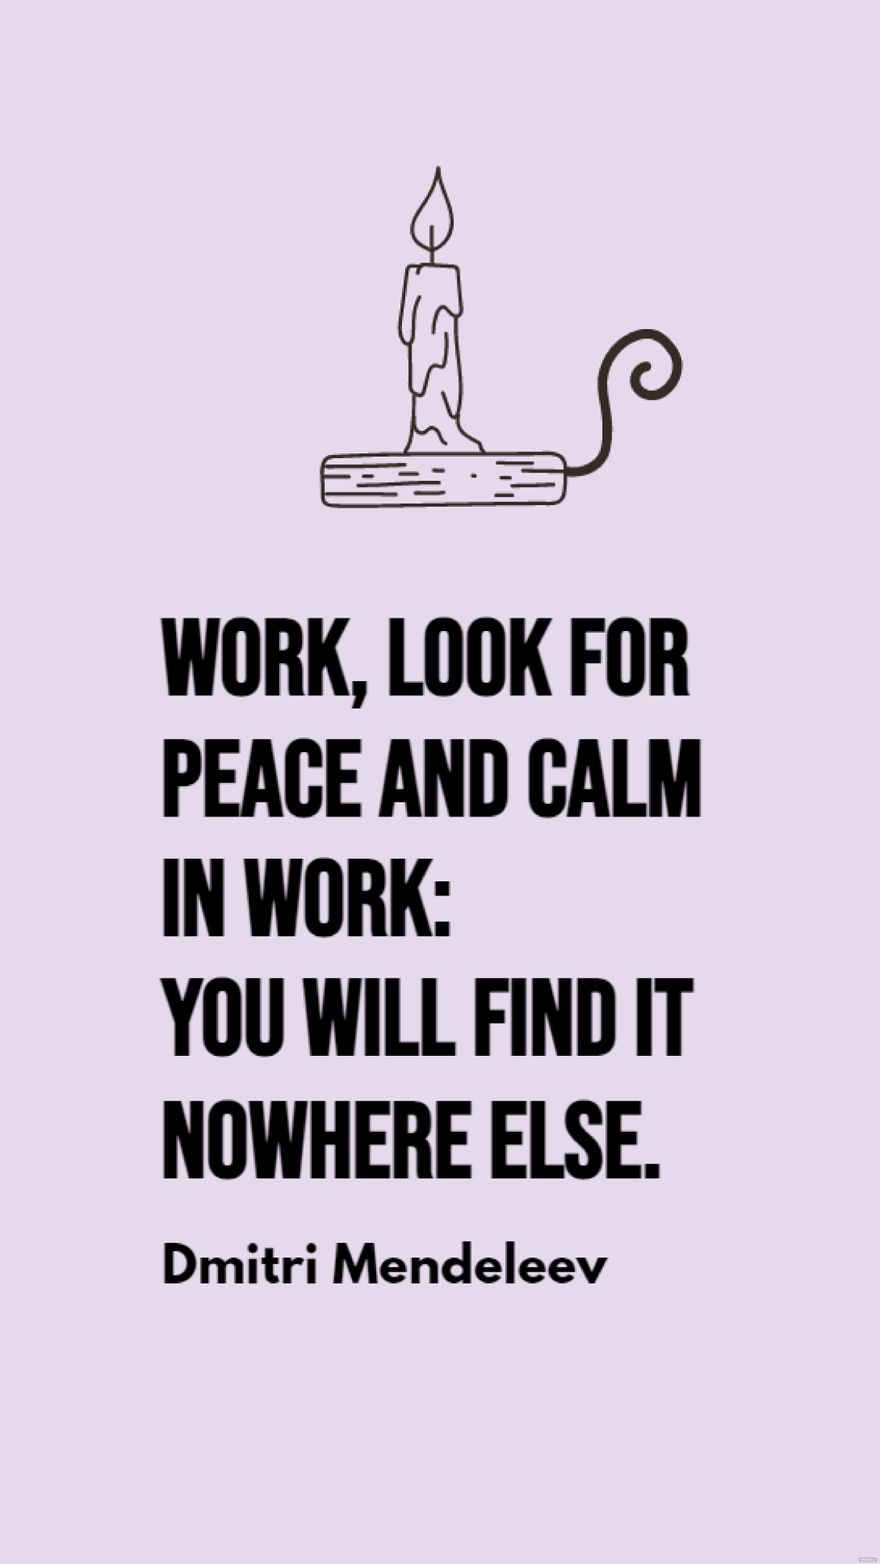 Free Dmitri Mendeleev - Work, look for peace and calm in work: you will find it nowhere else. in JPG